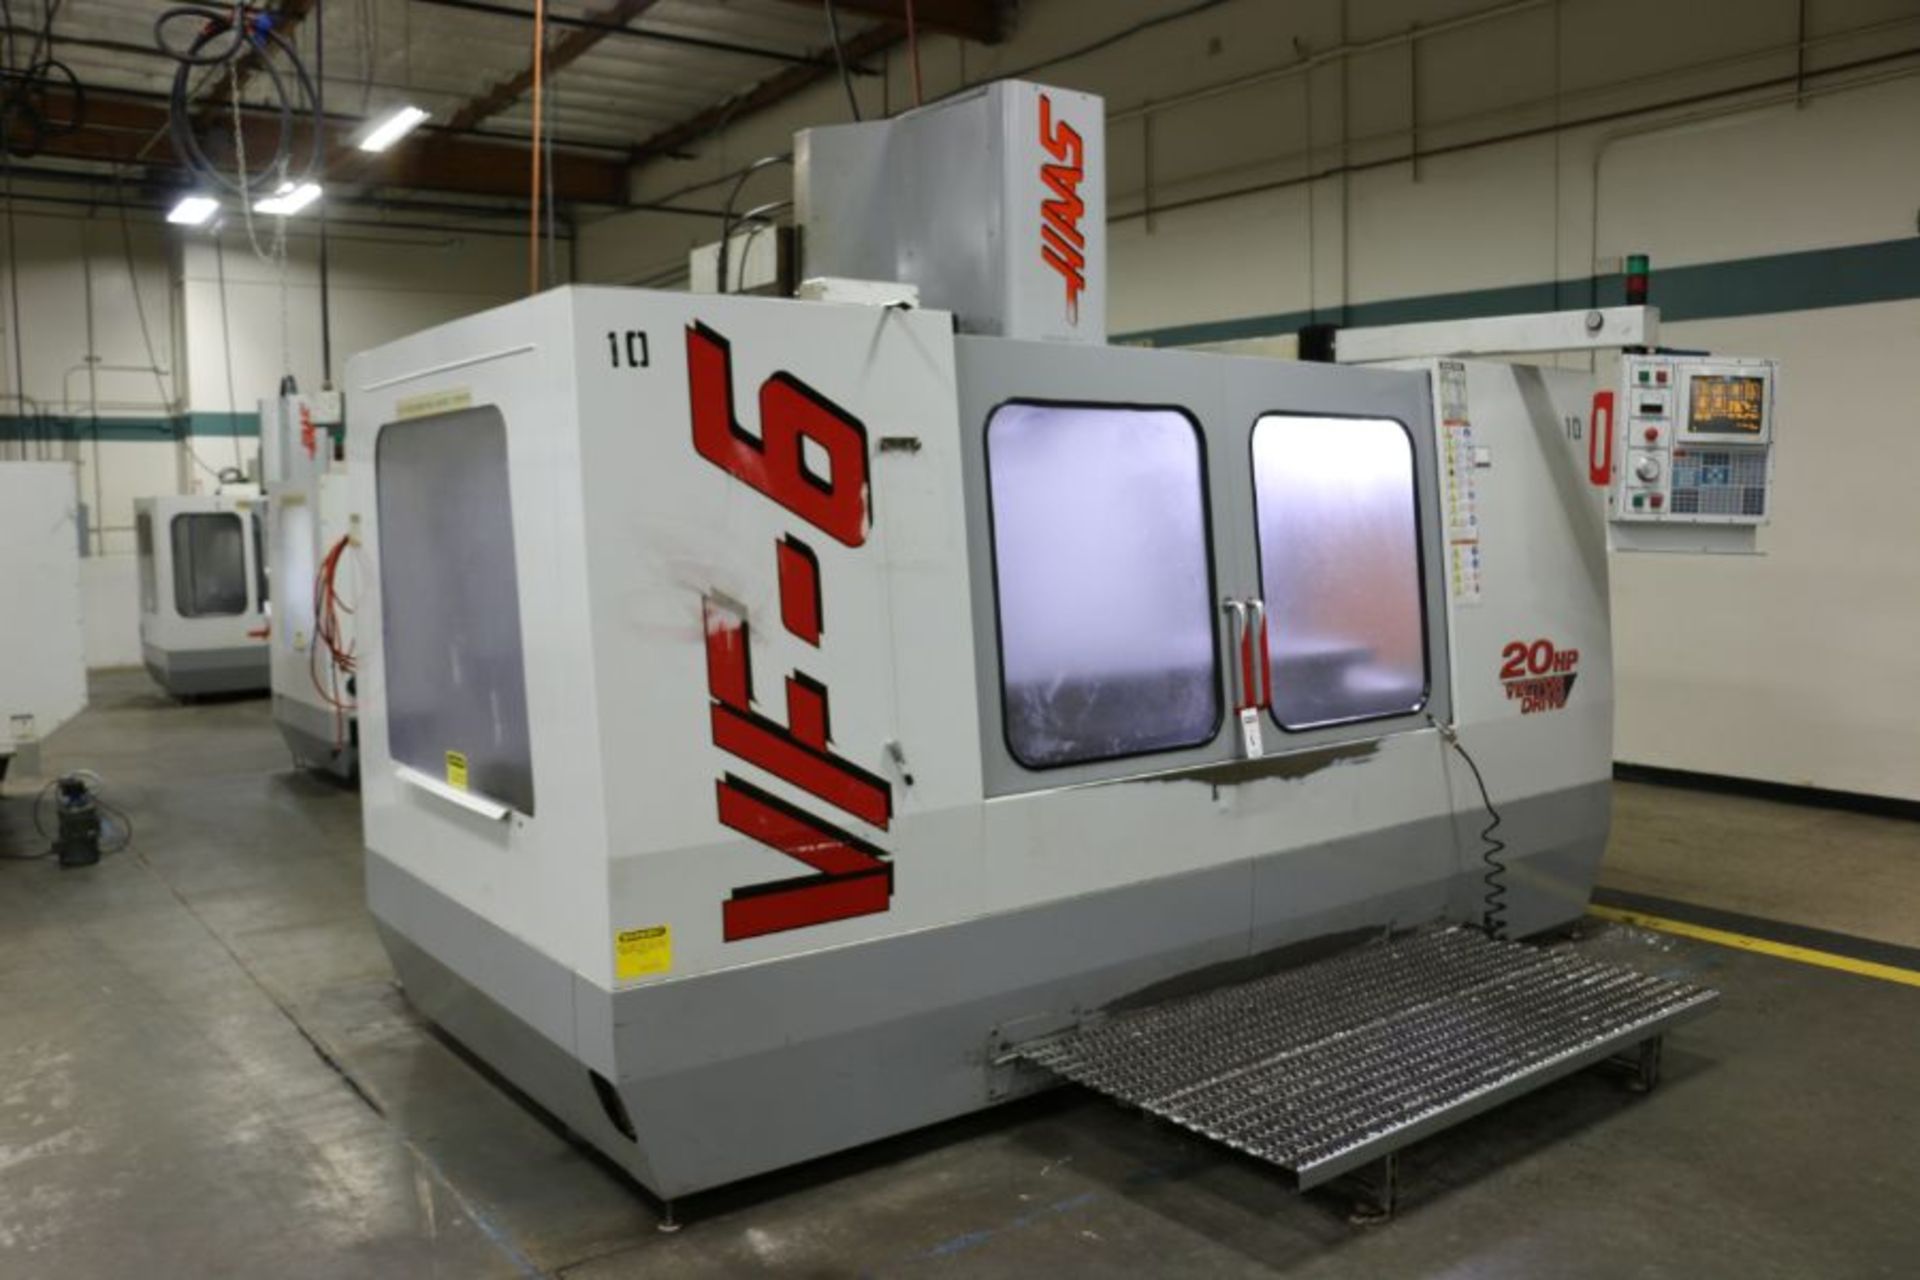 Haas VF-6, 64” x 32” x 30” Travels, 20 Position Tool Carousel, CTS, CT-40 Taper, s/n 12997, New 1998 - Image 3 of 12